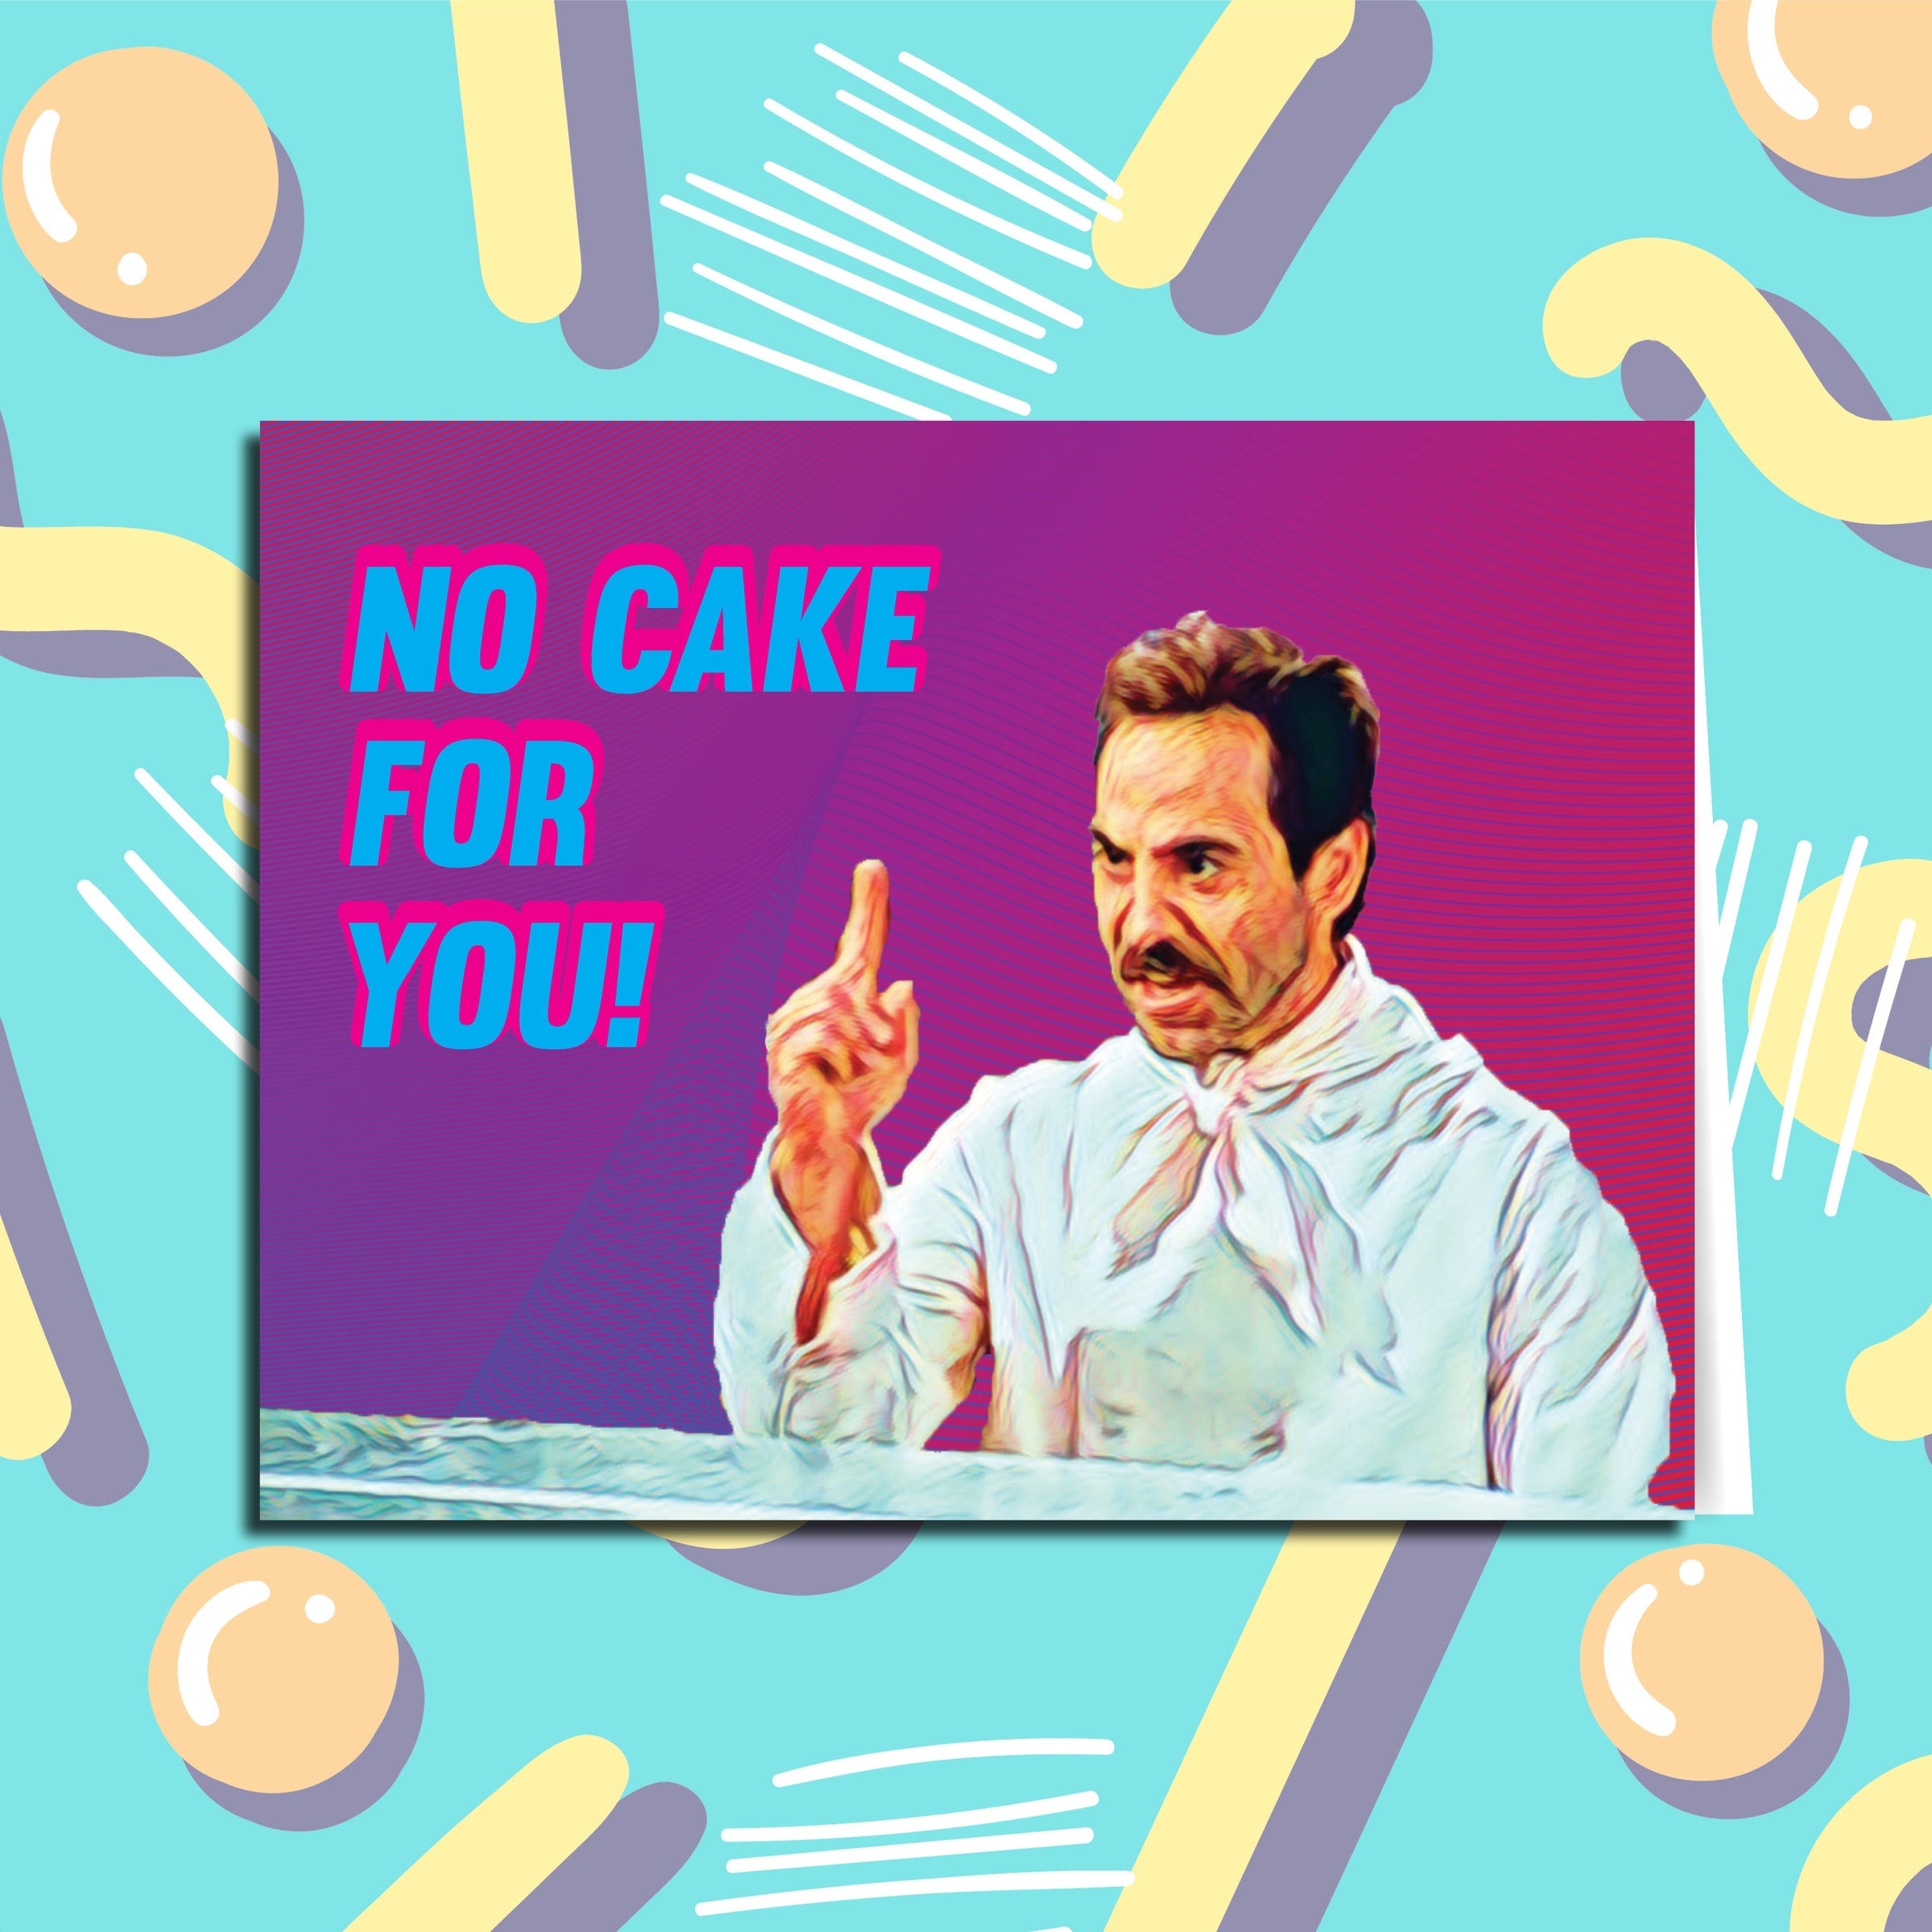 seinfeld-birthday-card-no-cake-for-you-soup-nazi-funny-9